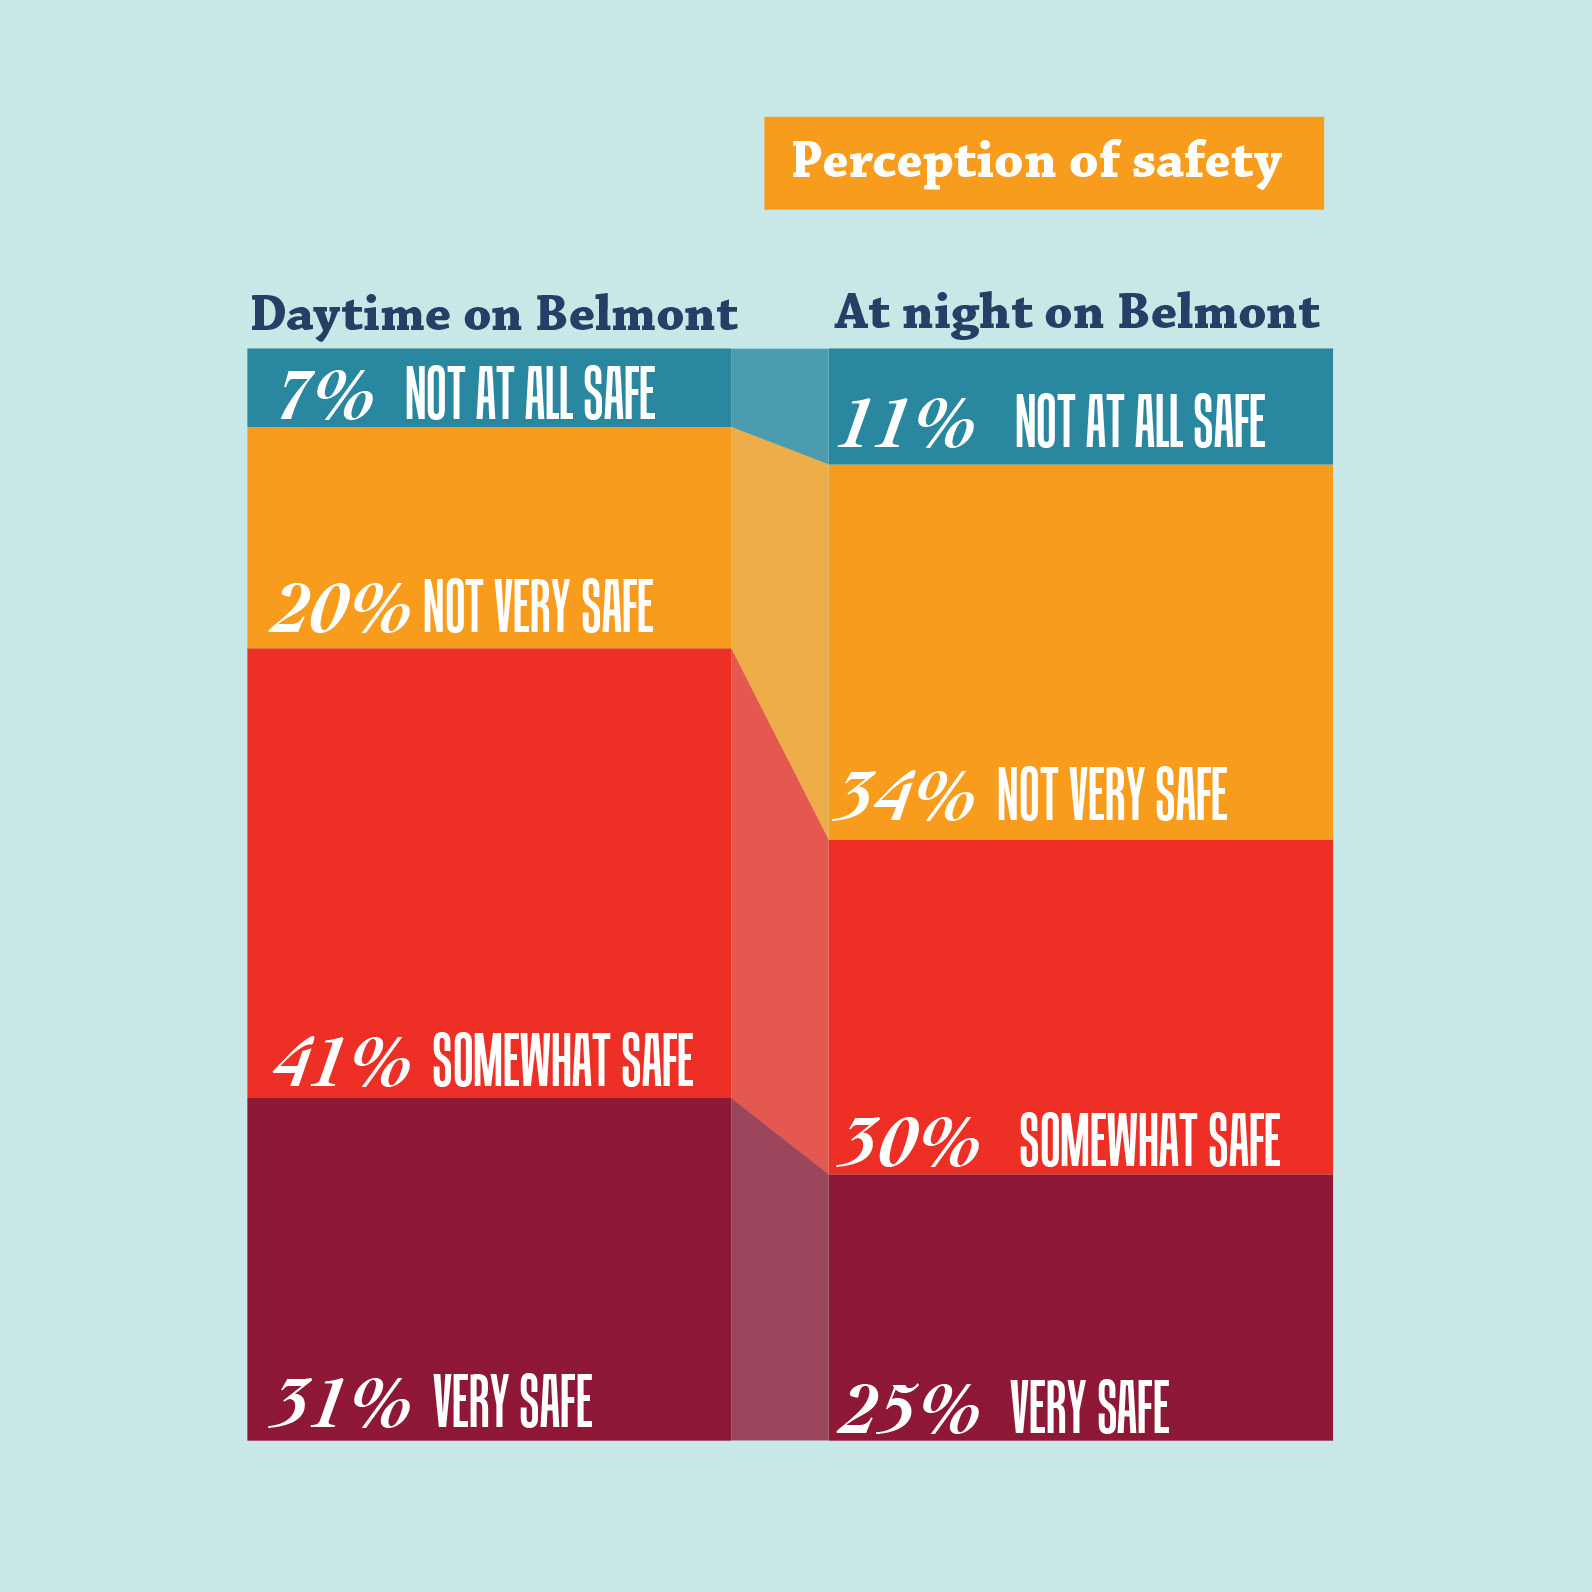 Graphic showing statistics from community survey about Perception of safety on Belmont during Daytime and at night